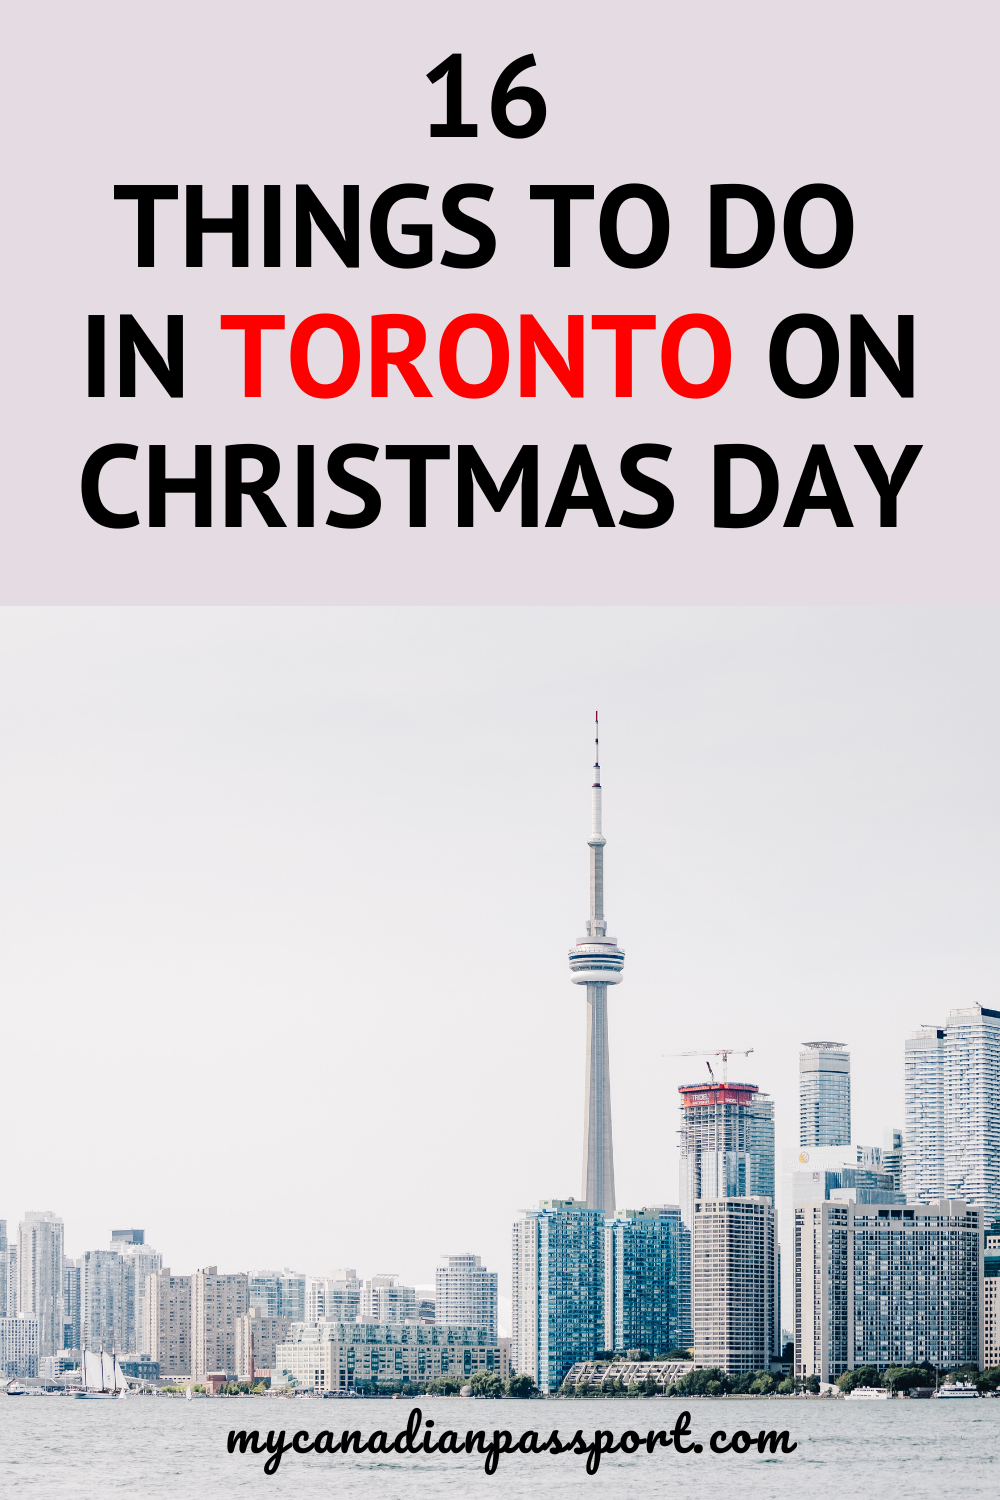 16 Things to Do in Toronto on Christmas Day My Canadian Passport